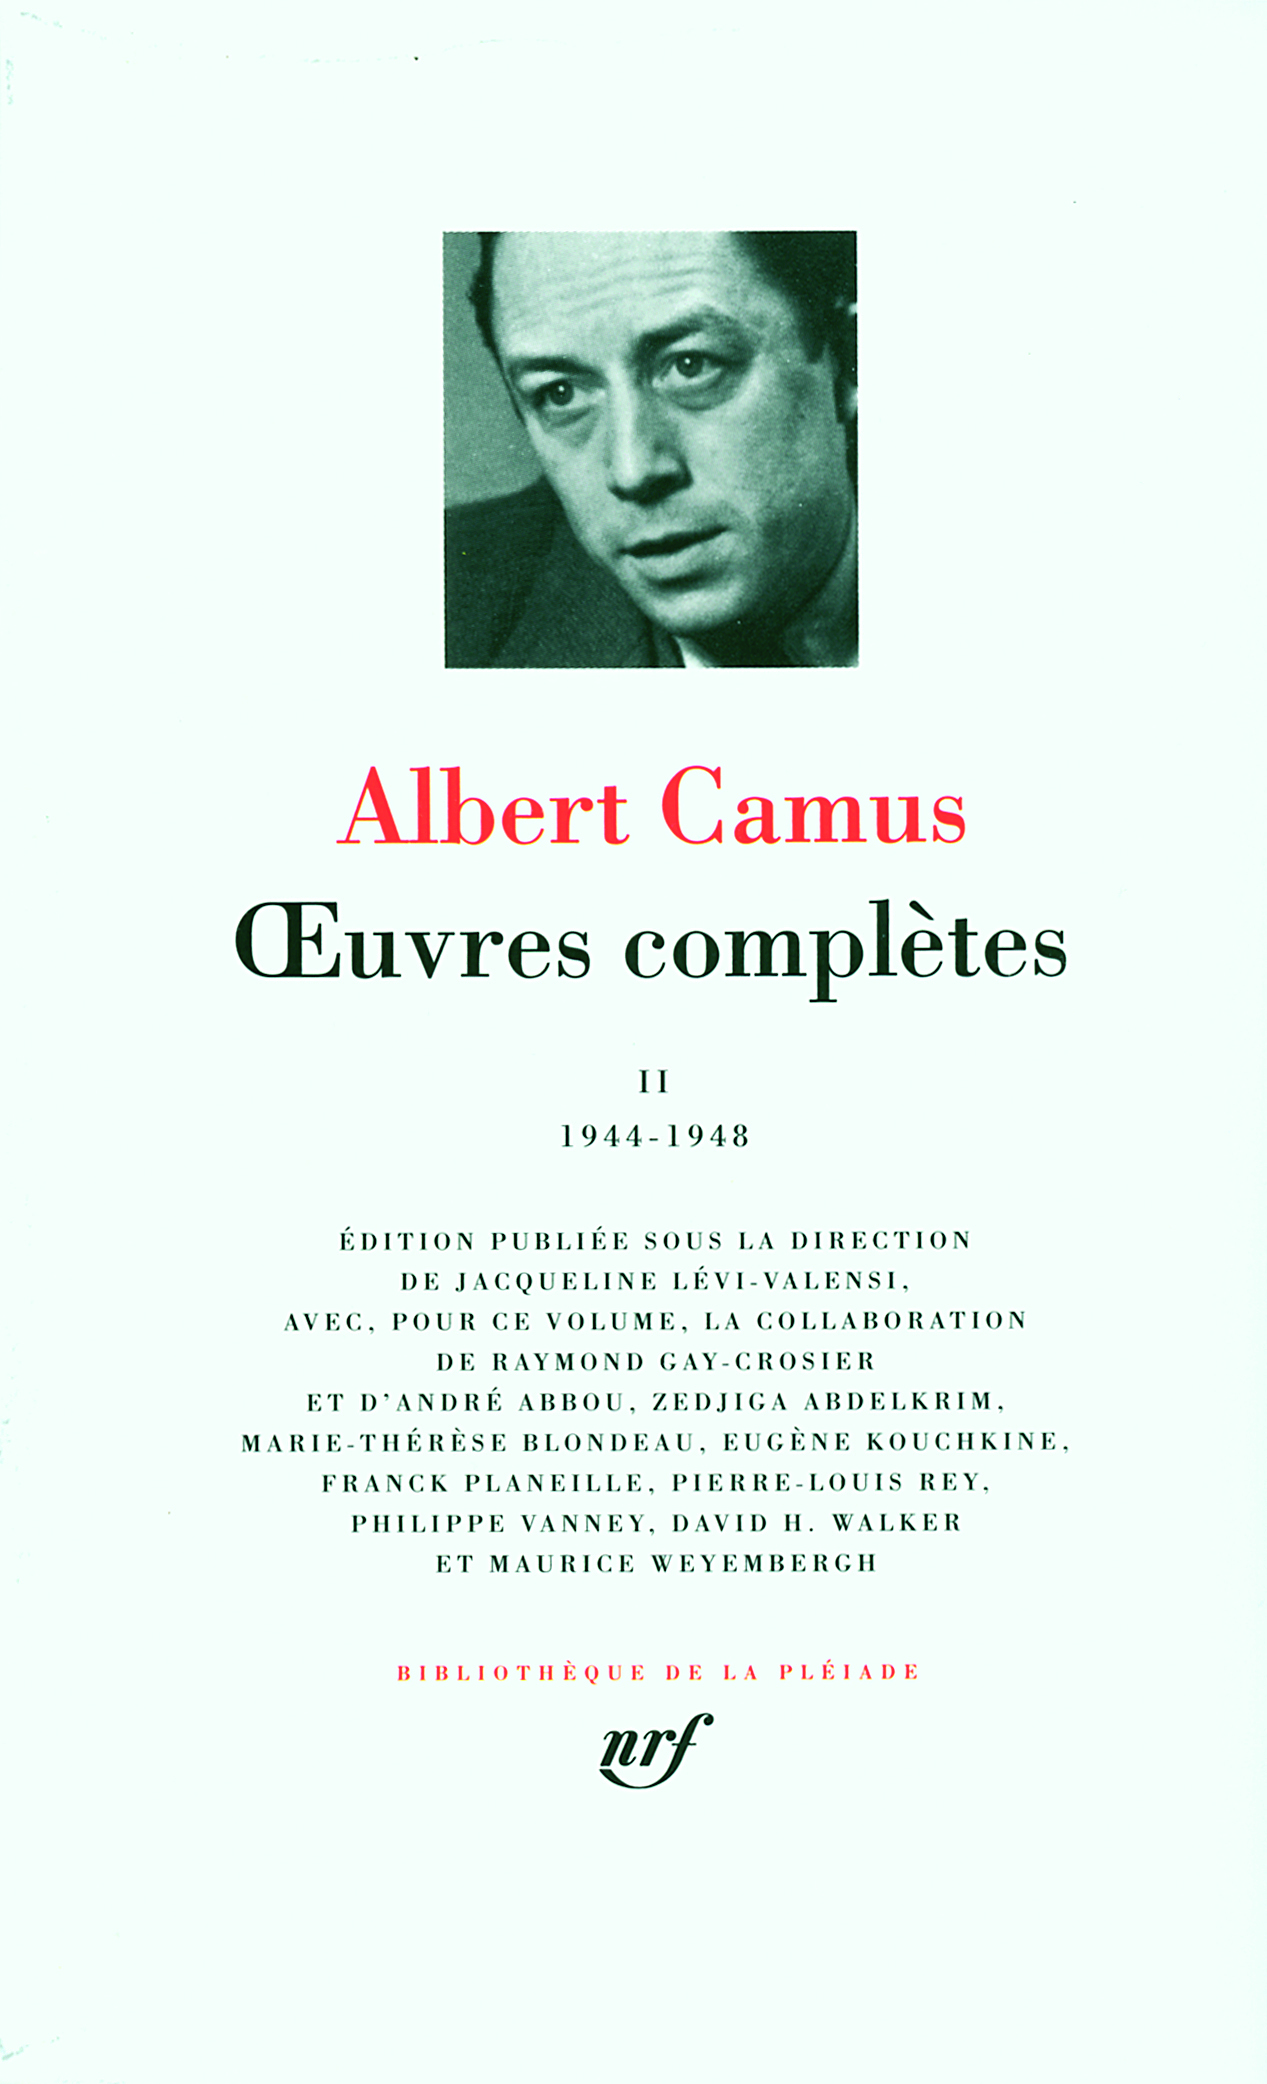 Œuvres complètes, 1944-1948 (9782070117031-front-cover)